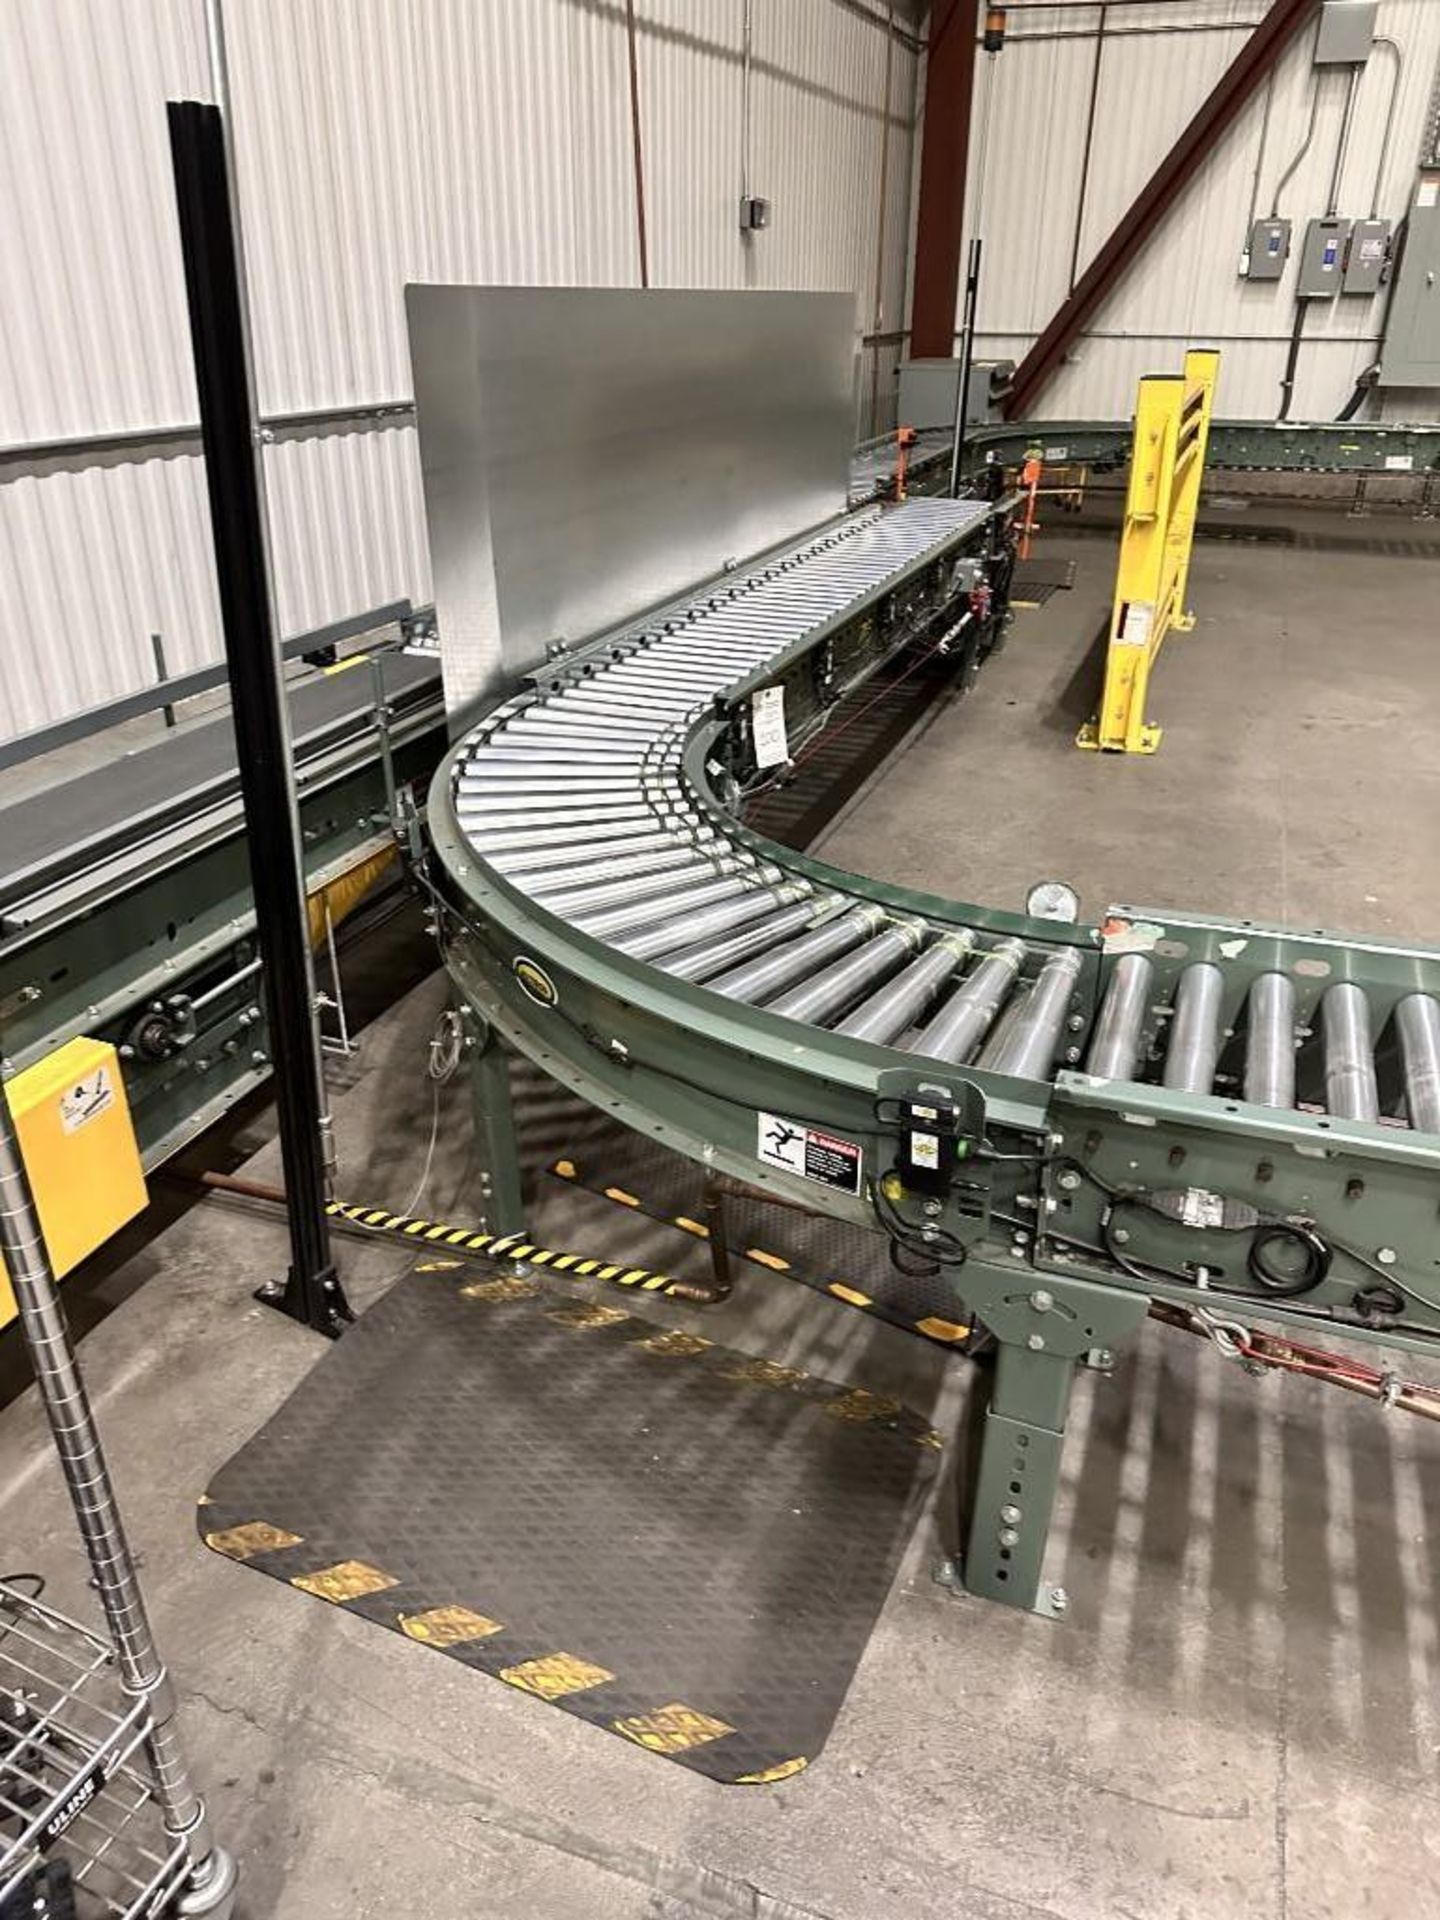 HYTROL POWER CONVEYOR SYSTEM 57 FOOT LONG DRIVEN. WITH BOX SHIFTER - Image 2 of 10